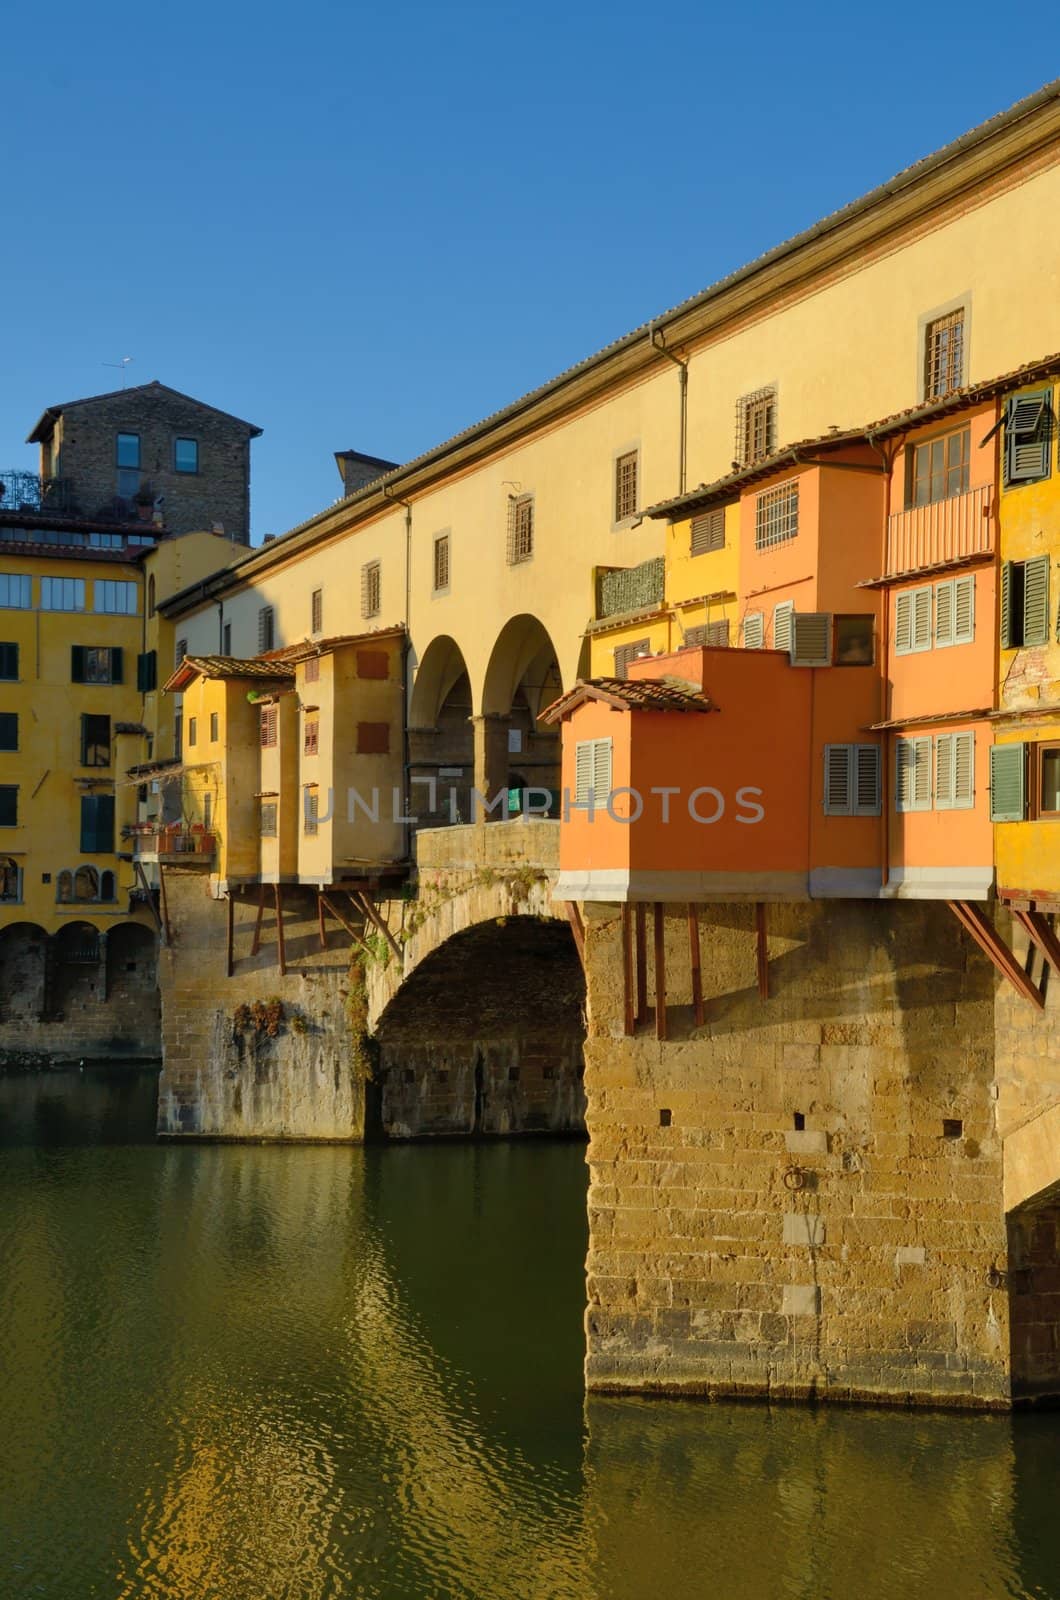 Florence is considered the jewel of the reinessance, is one of the most beautiful italian town